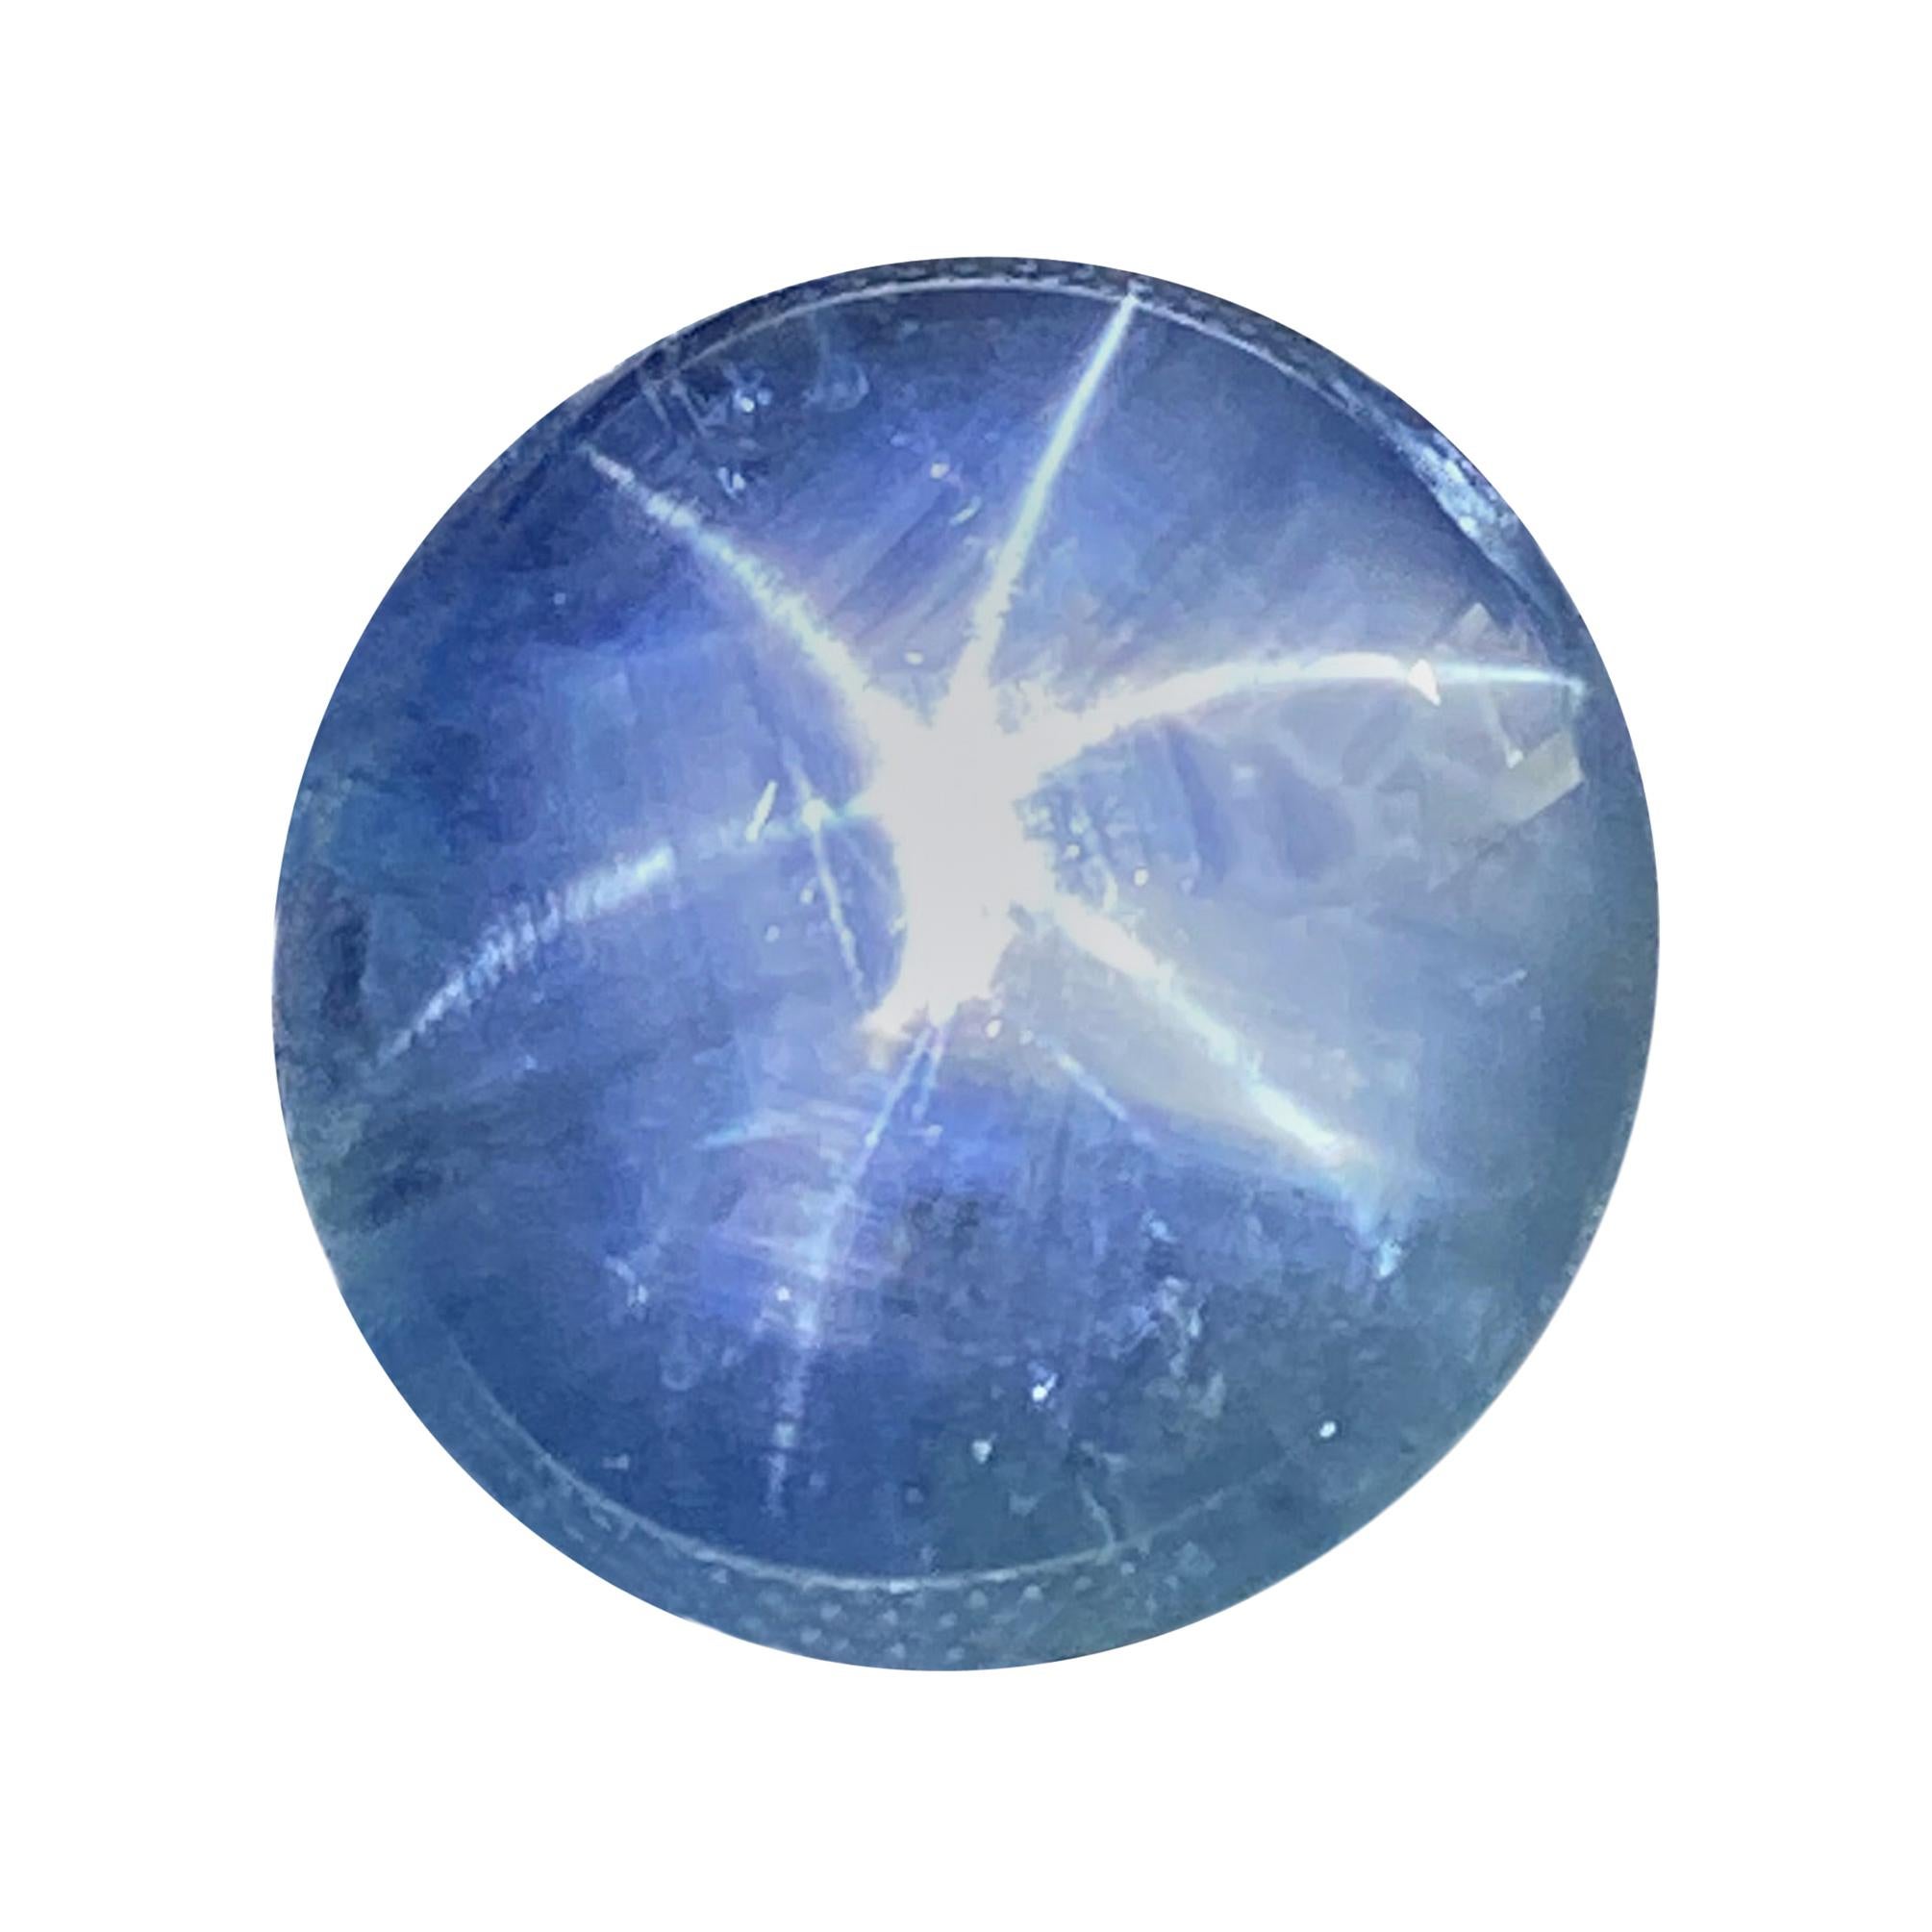 25.30 Carat GRS Certified Unheated Burmese Blue Star Sapphire:

A beautiful and rare gem, it is a 25.30 carat unheated Burmese blue star sapphire. Hailing from the historic Mogok mines in Burma, the sapphire possesses a greenish-blue colour